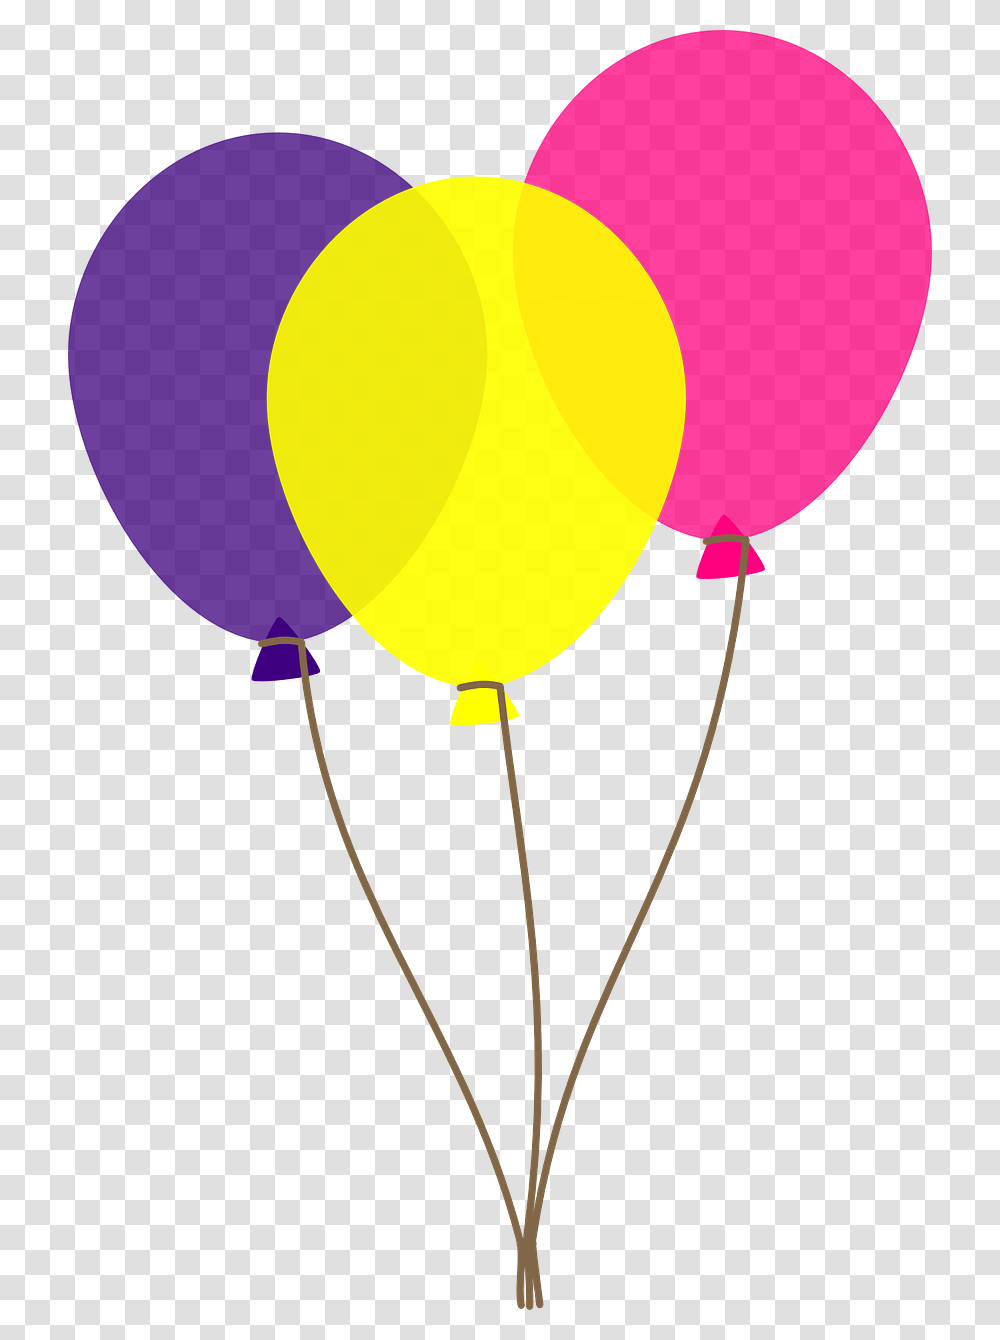 Balloon Free Content Birthday Clip Art Balloons Clipart Background, Lamp Transparent Png